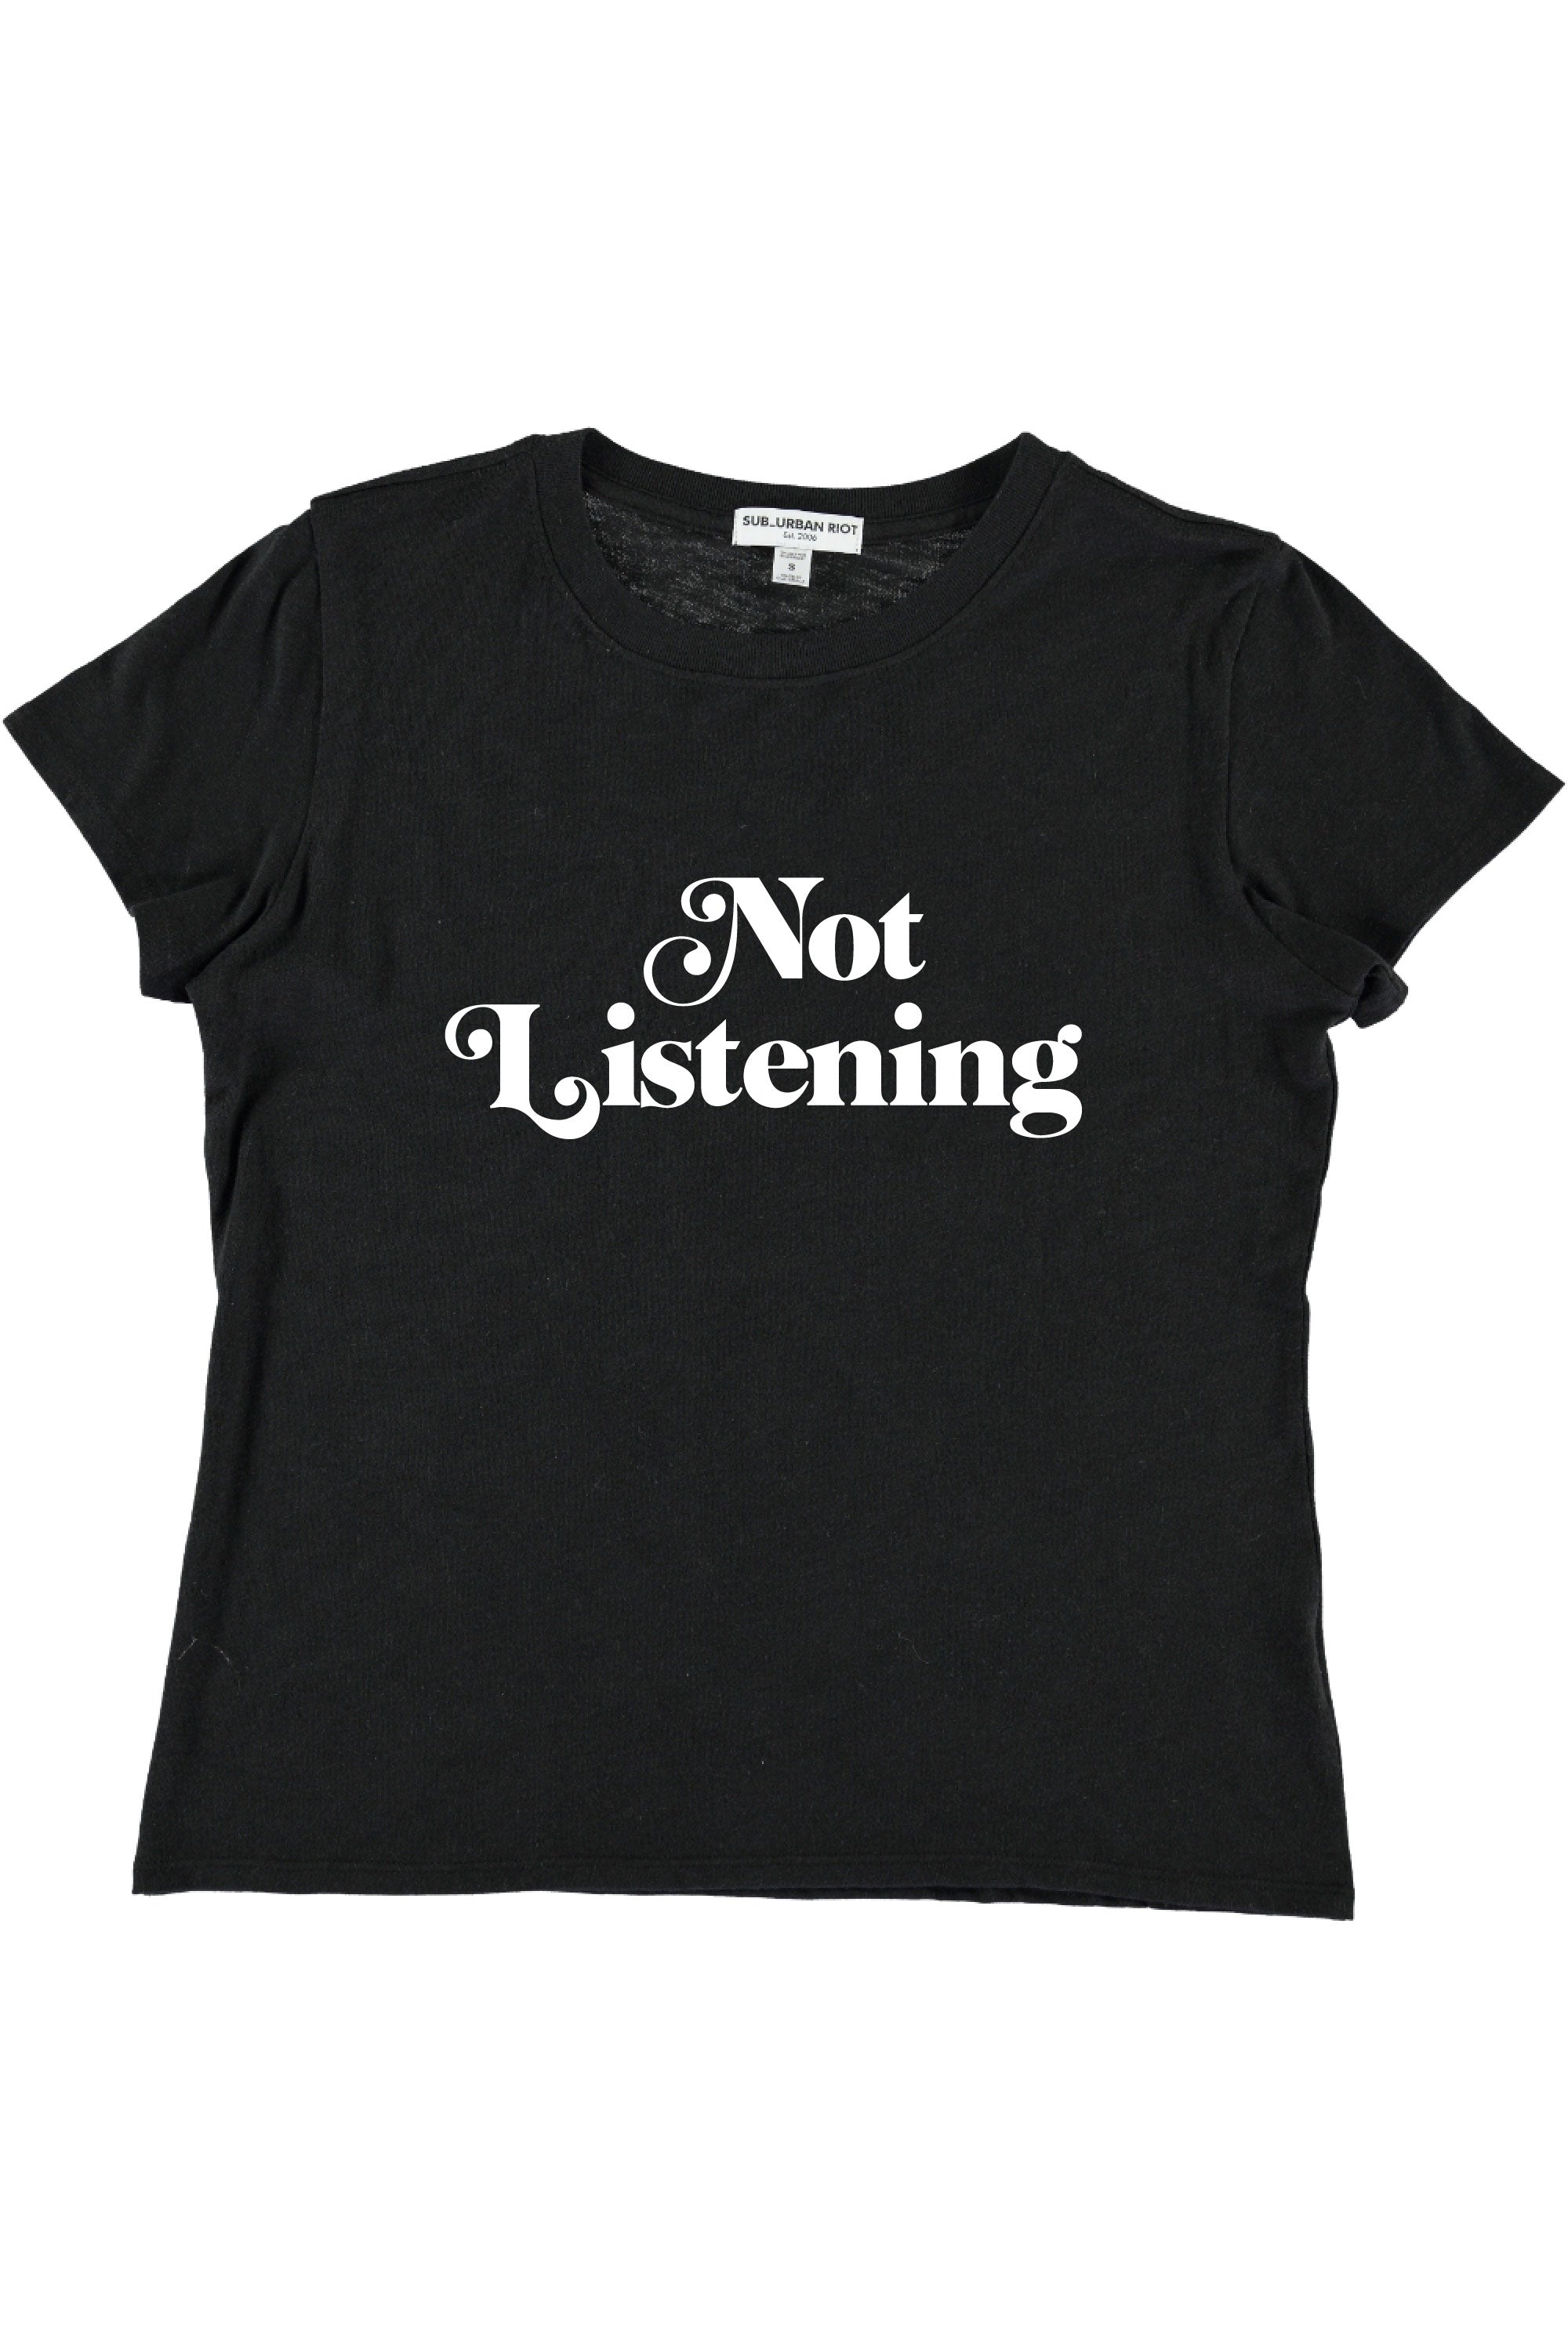 NOT LISTENING YOUTH SIZE LOOSE TEE